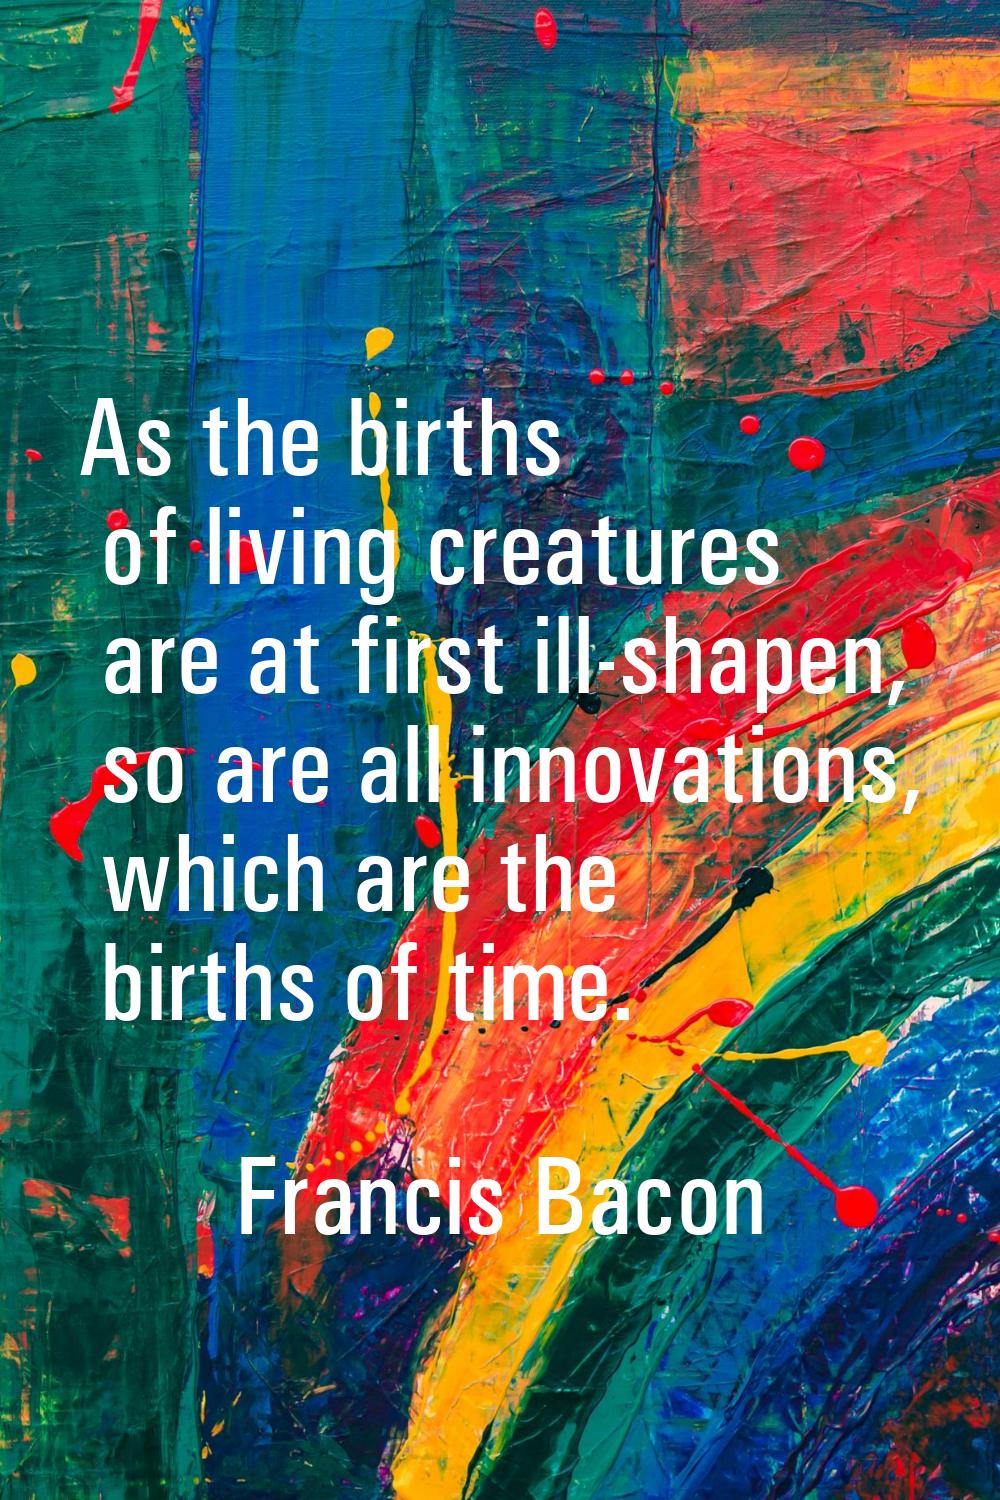 As the births of living creatures are at first ill-shapen, so are all innovations, which are the bi